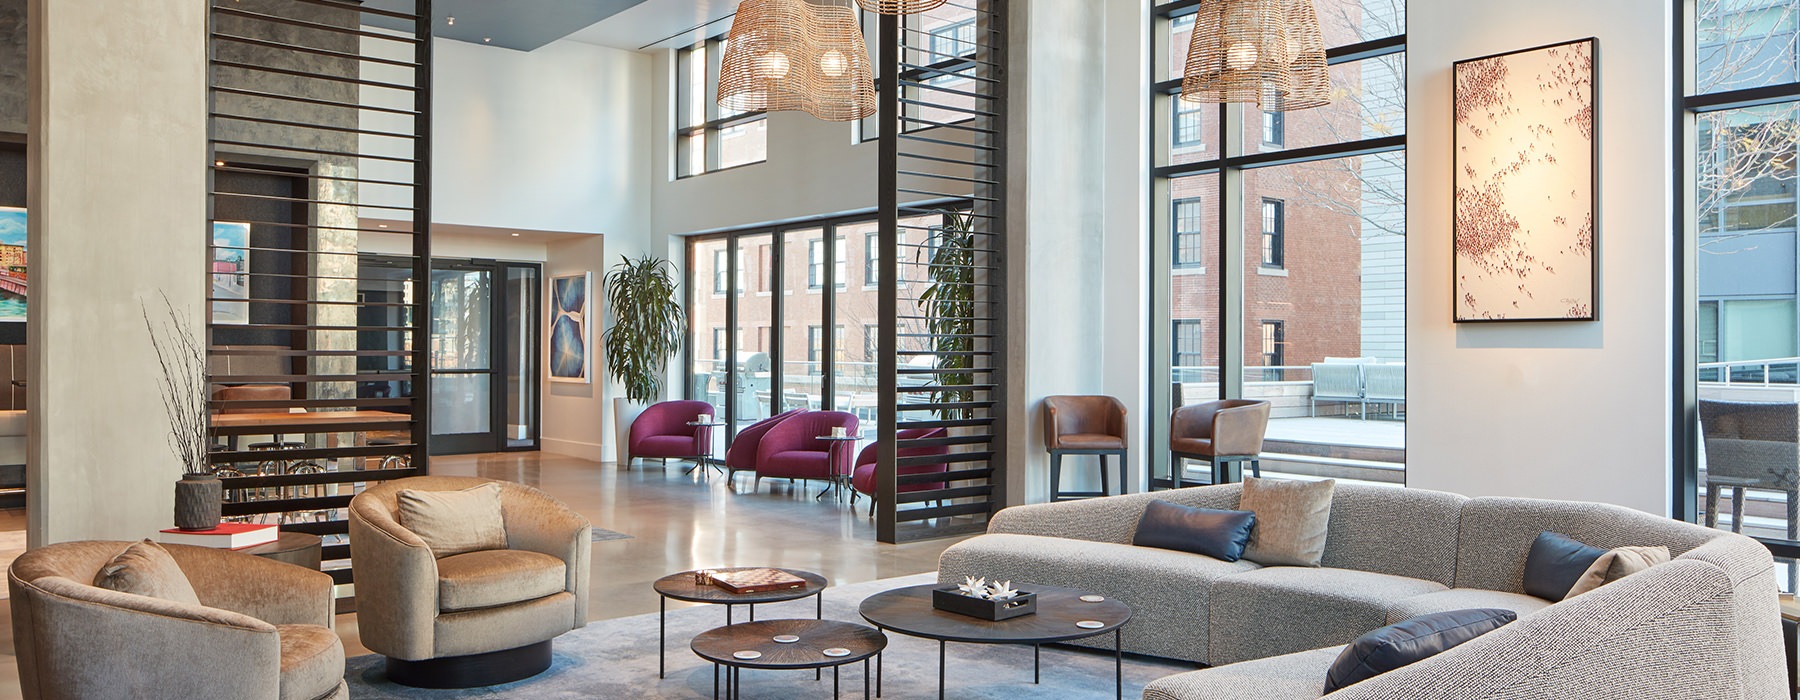 lobby at Watermark Seaport with lounge area